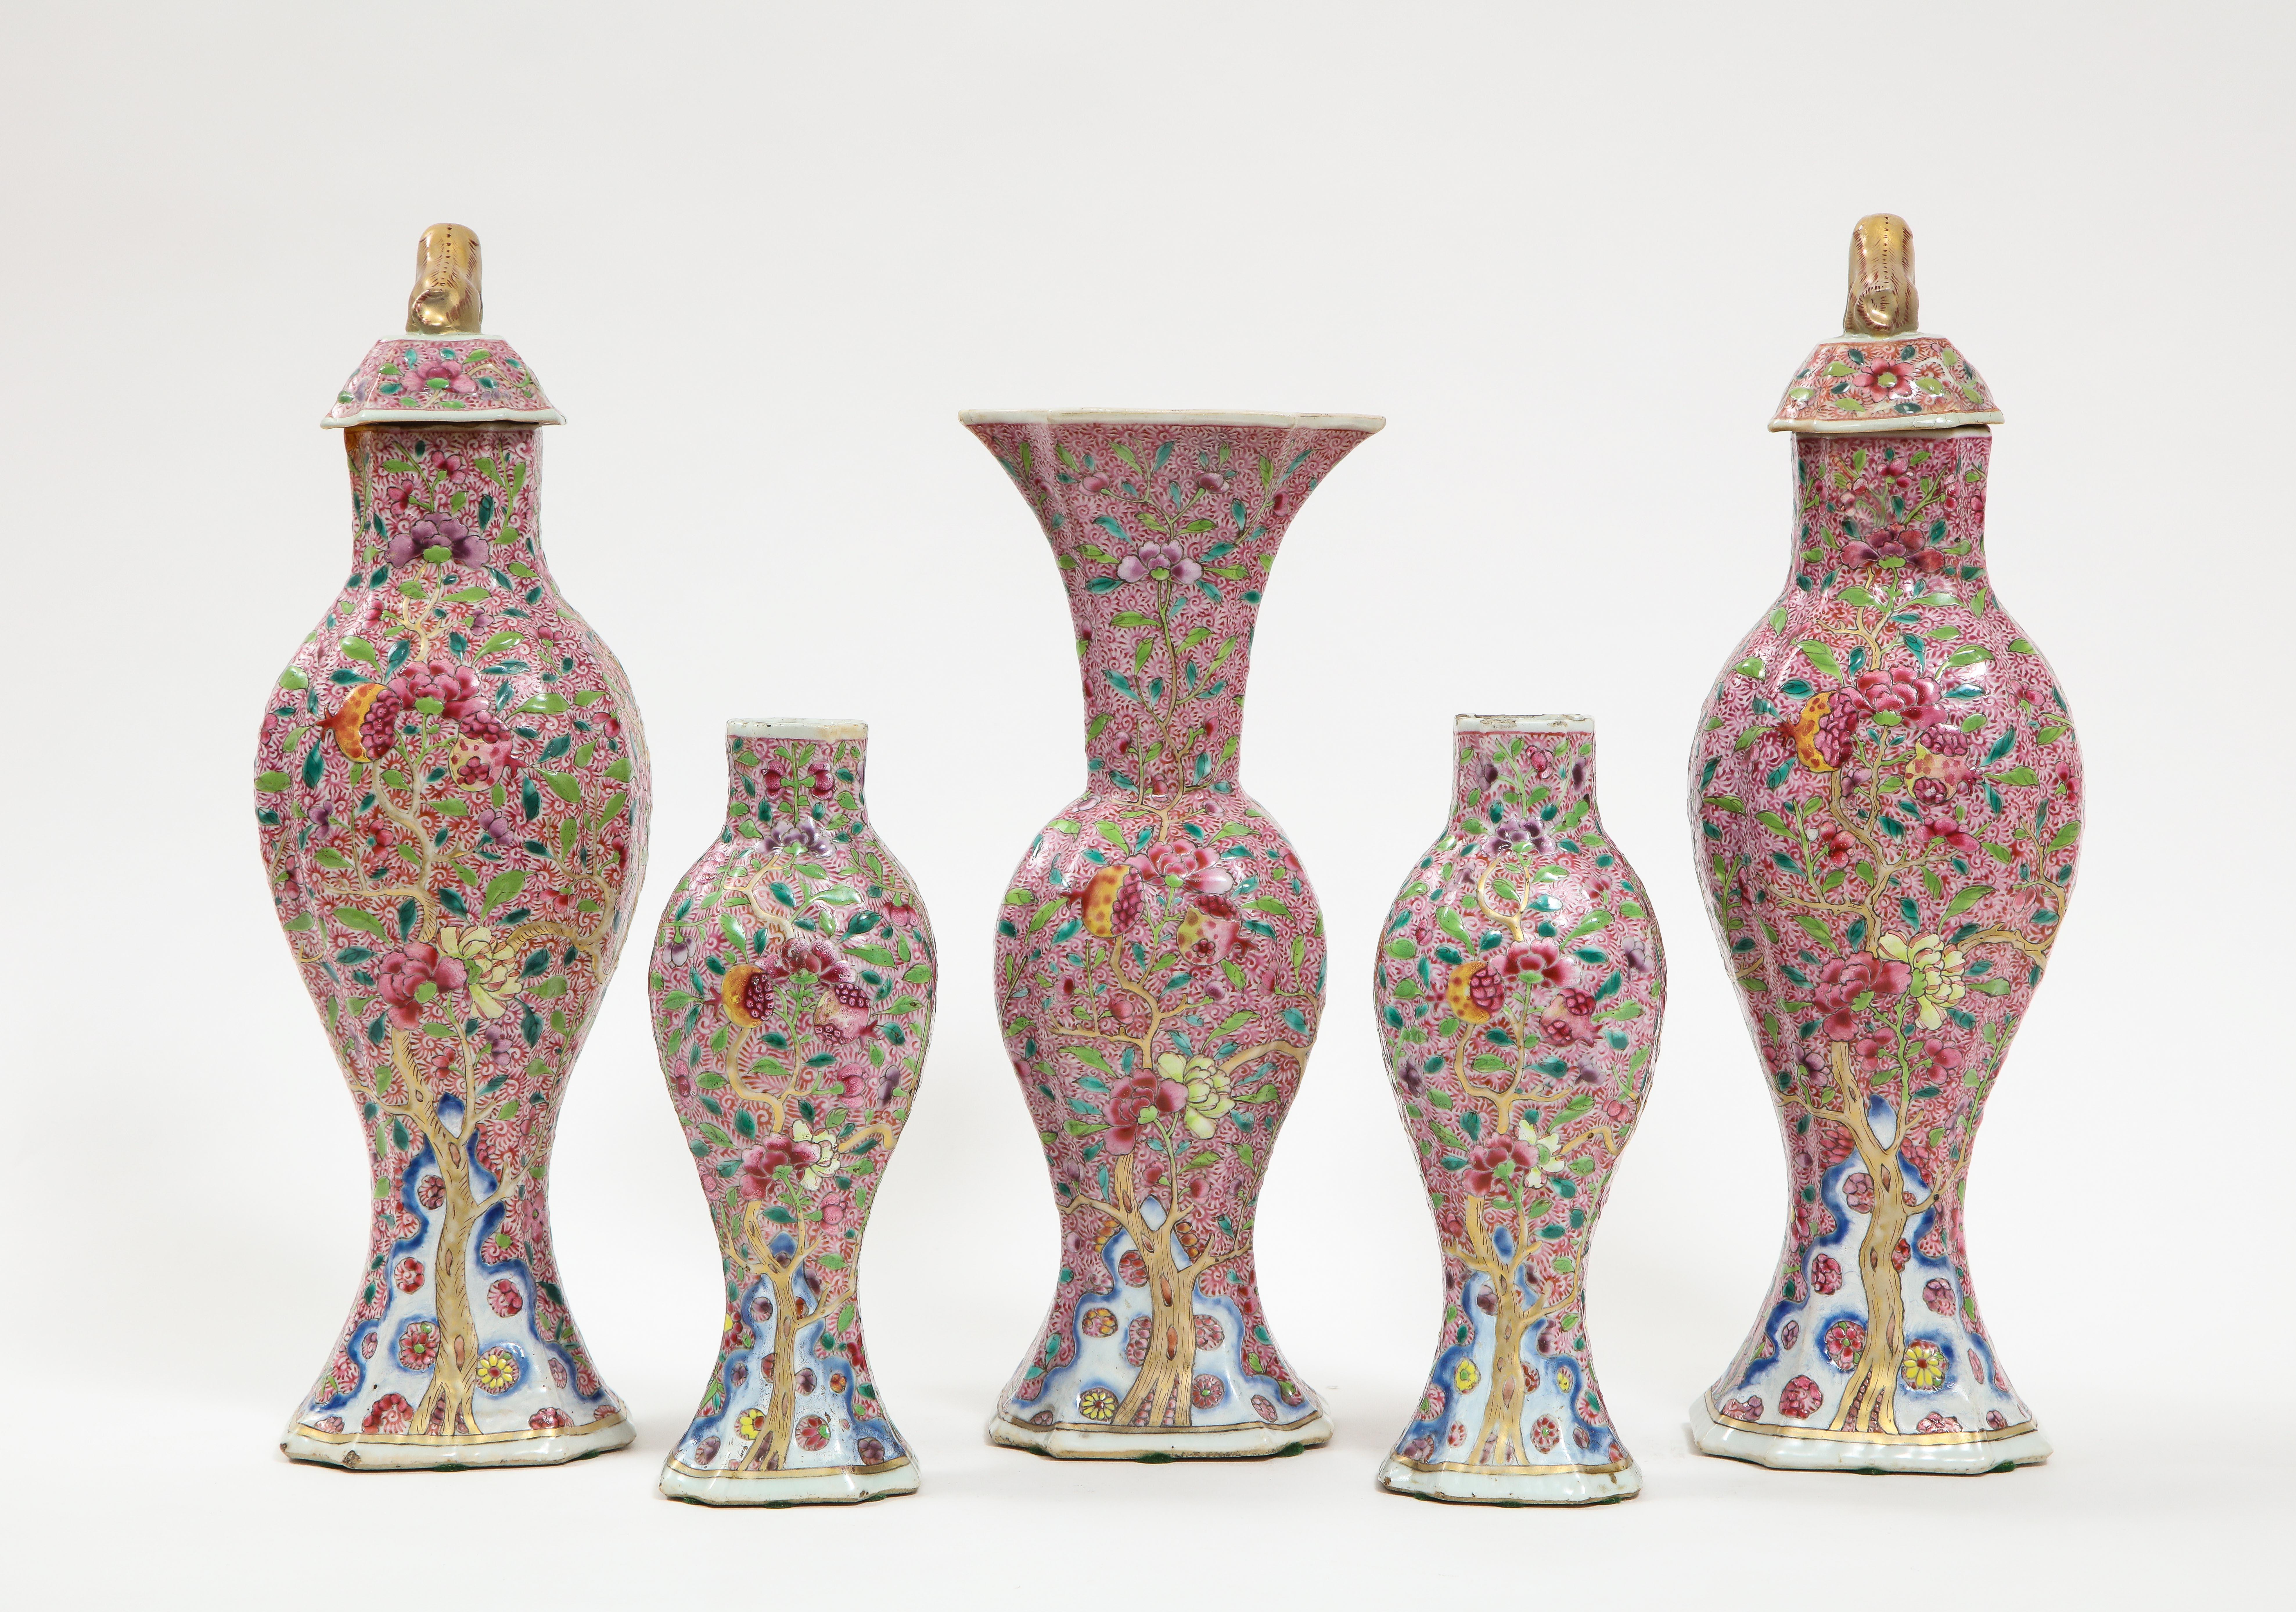 A 19th century Chinese porcelain famille rose puce ground five piece garniture set with floral designs. The five-piece set is complete with two large covered vases with gilt foo-dog finials, two smaller uncovered vases, and one mid-sized vase with a